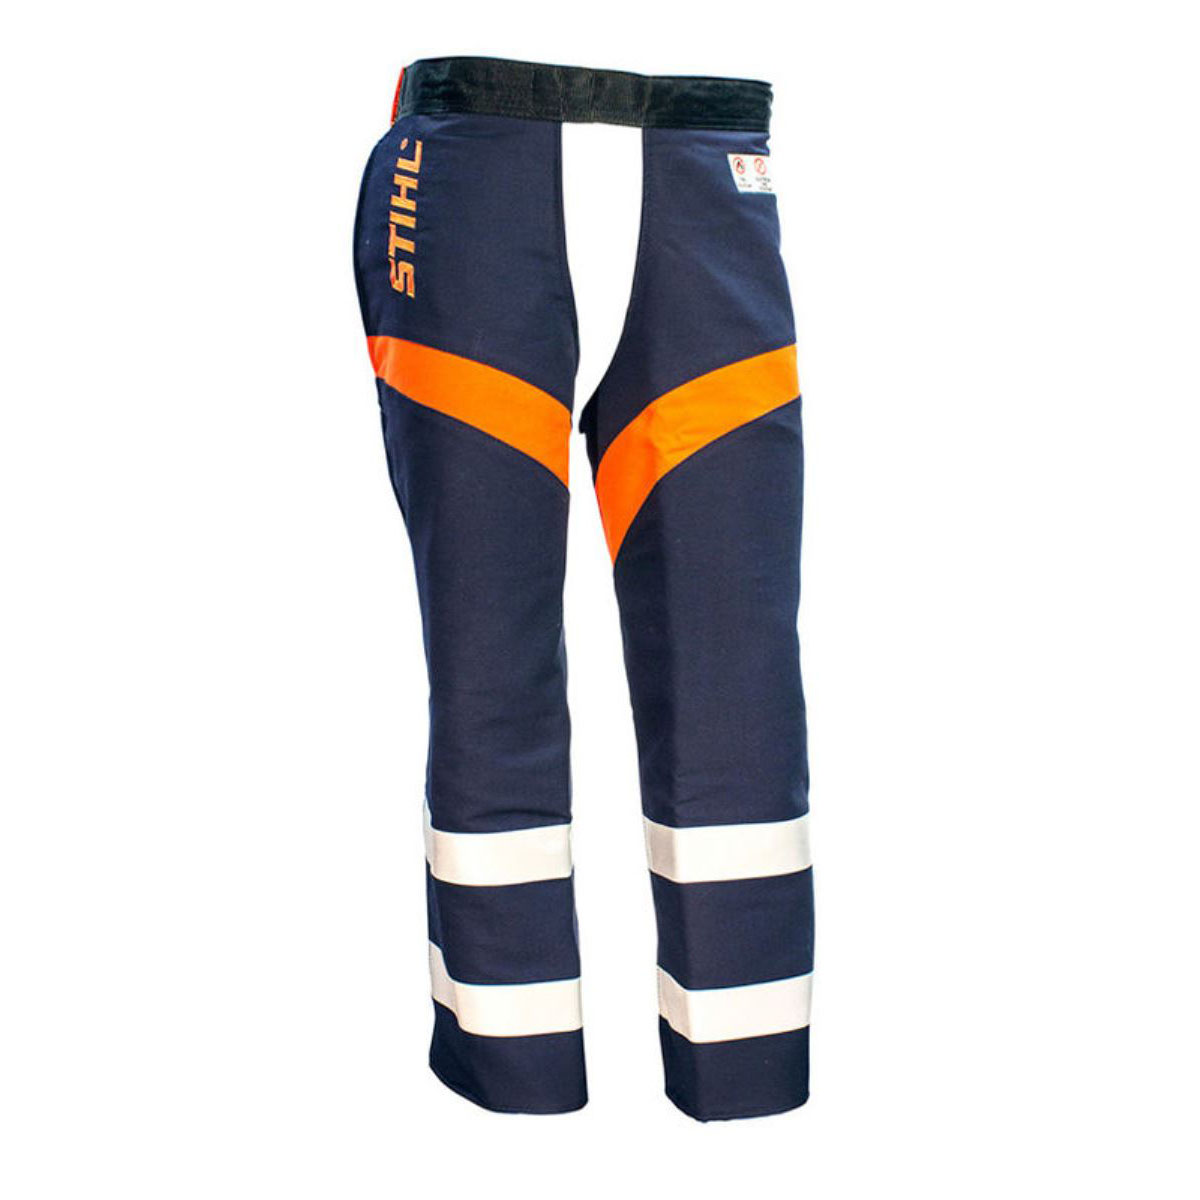 Government + Utility Protective Chaps   Navy Blue